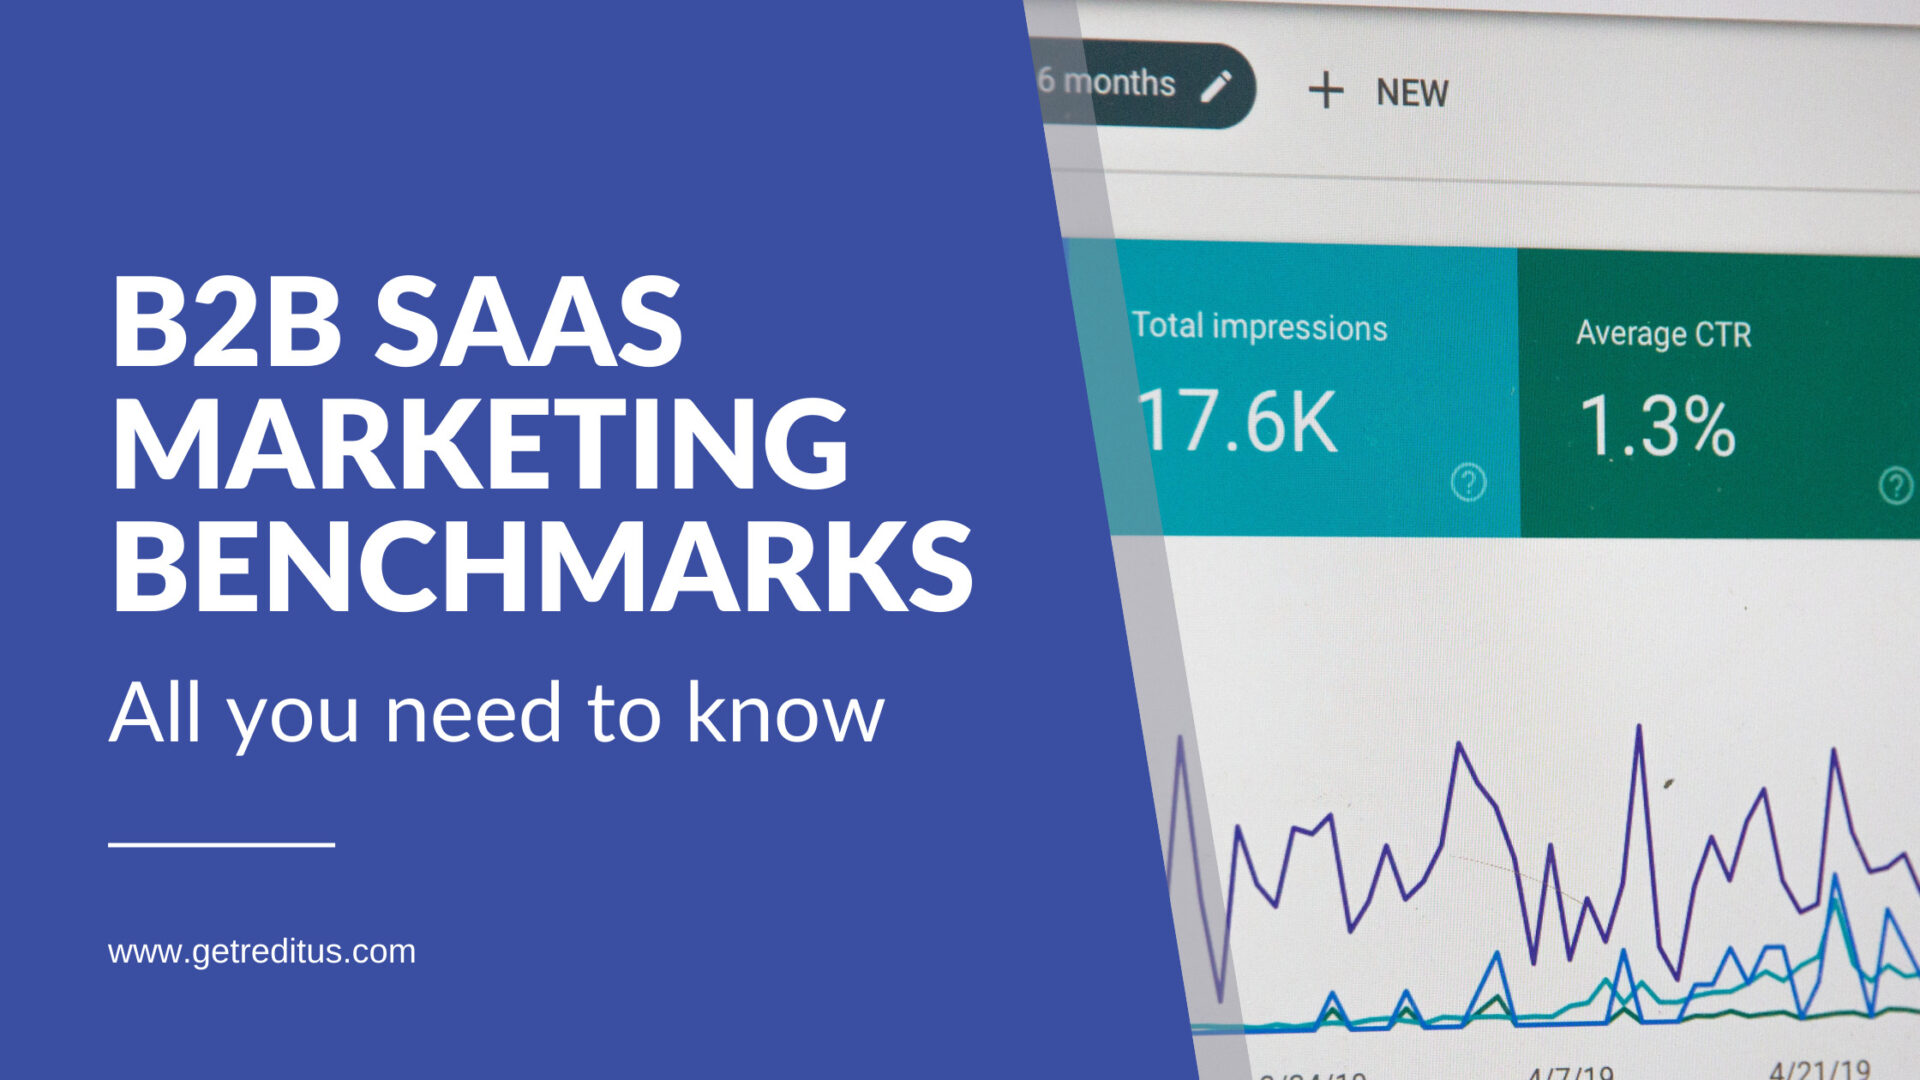 All You Need To Know About B2B SaaS Marketing Benchmarks